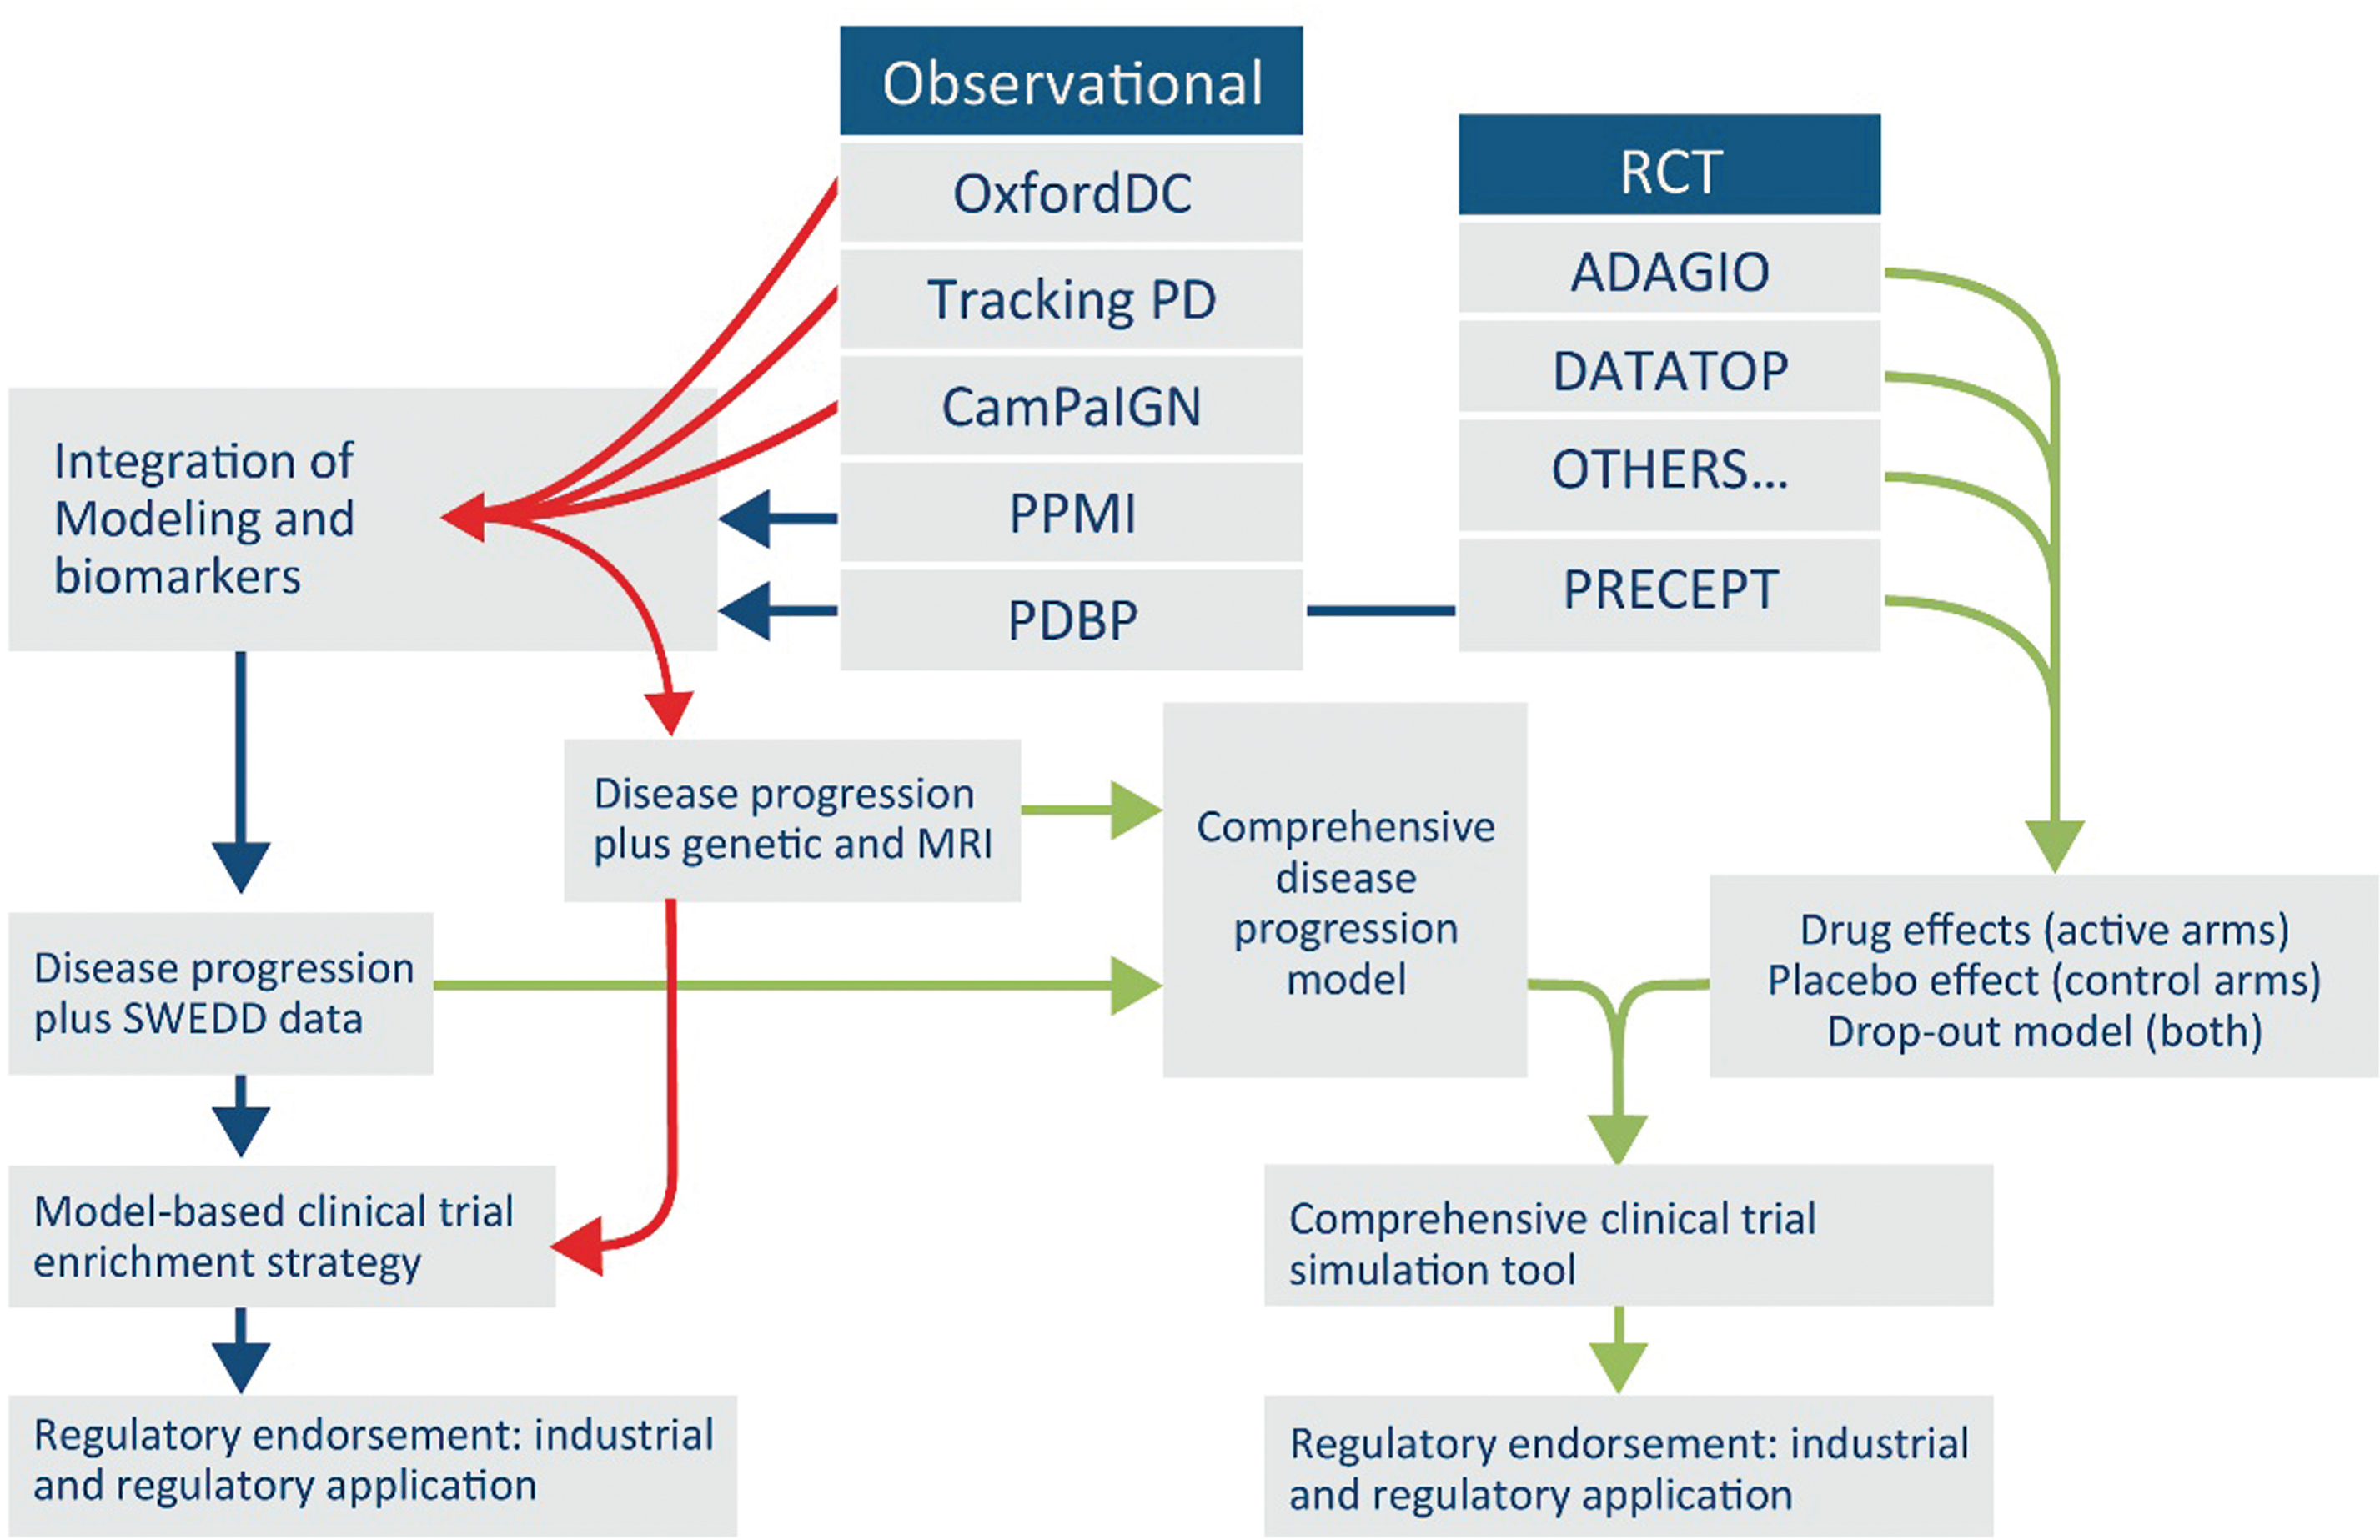 Proposed Roadmap for building PD drug development tools with existing data. Proposed roadmap outlining a potential future path for integrating global data from PD observational and clinical trials targeting early stages. Integration of diverse data from at least seven independent clinical studies into a unified database will enable a regulatory path for use of biomarkers and quantitative disease progression models that serve to streamline and derisk drug development of new therapies.